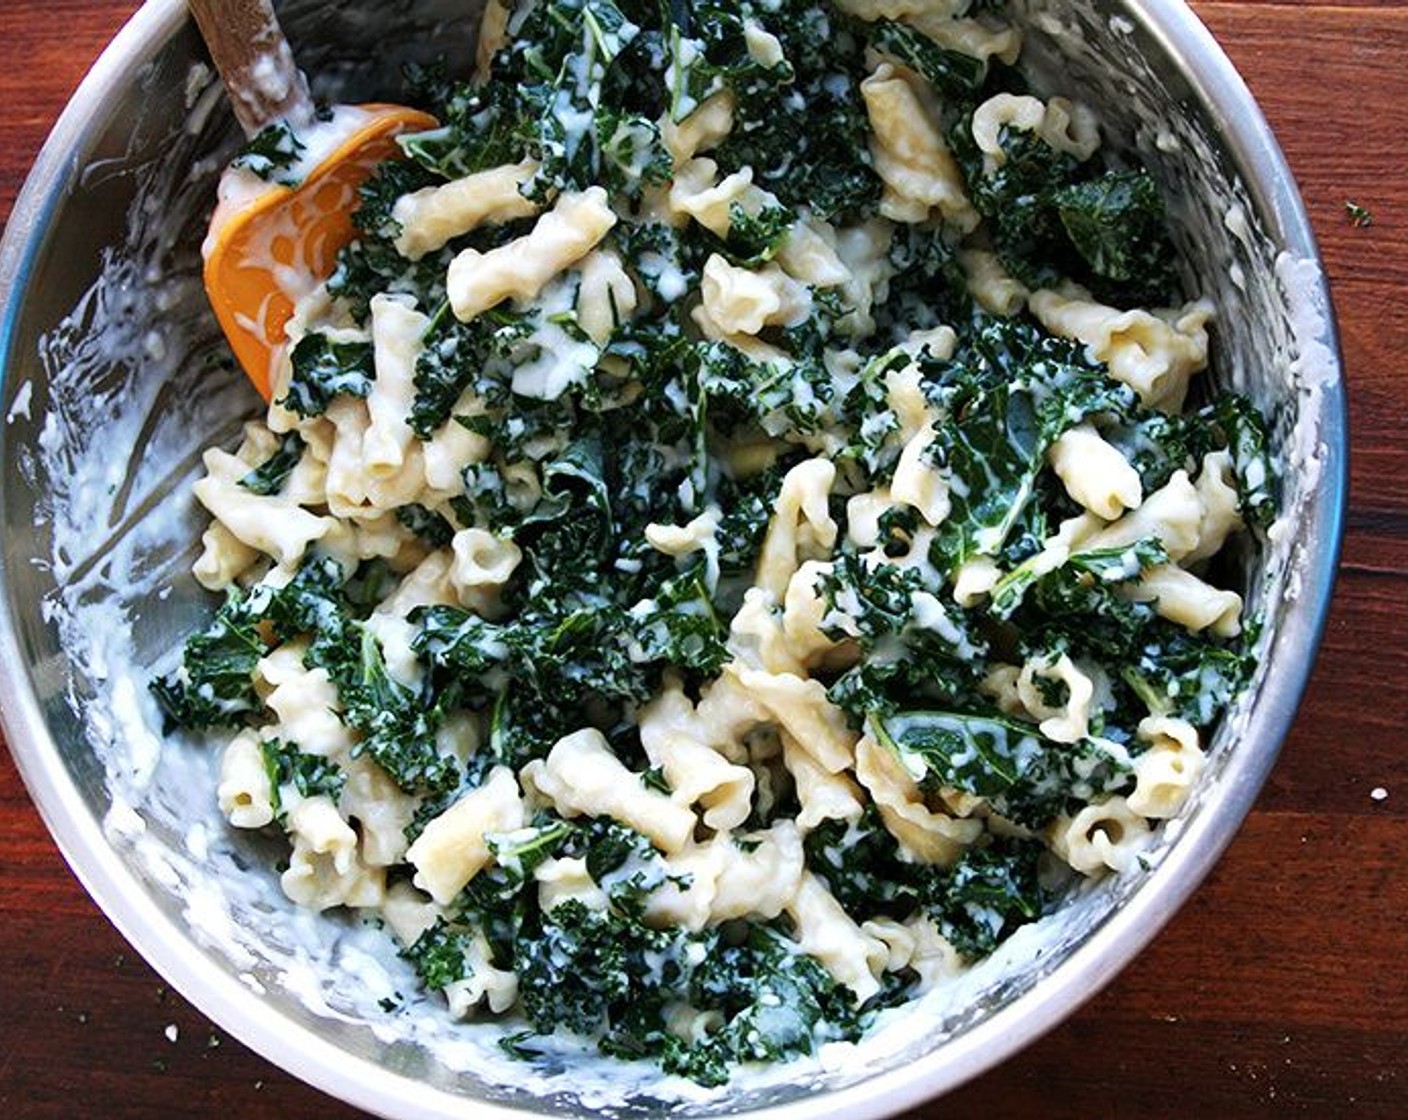 step 3 Chop the Kale (9 cups) into small pieces. In a large mixing bowl, toss pasta with thickened bechamel and Parmesan Cheese (1 1/2 cups), then fold in chopped kale.